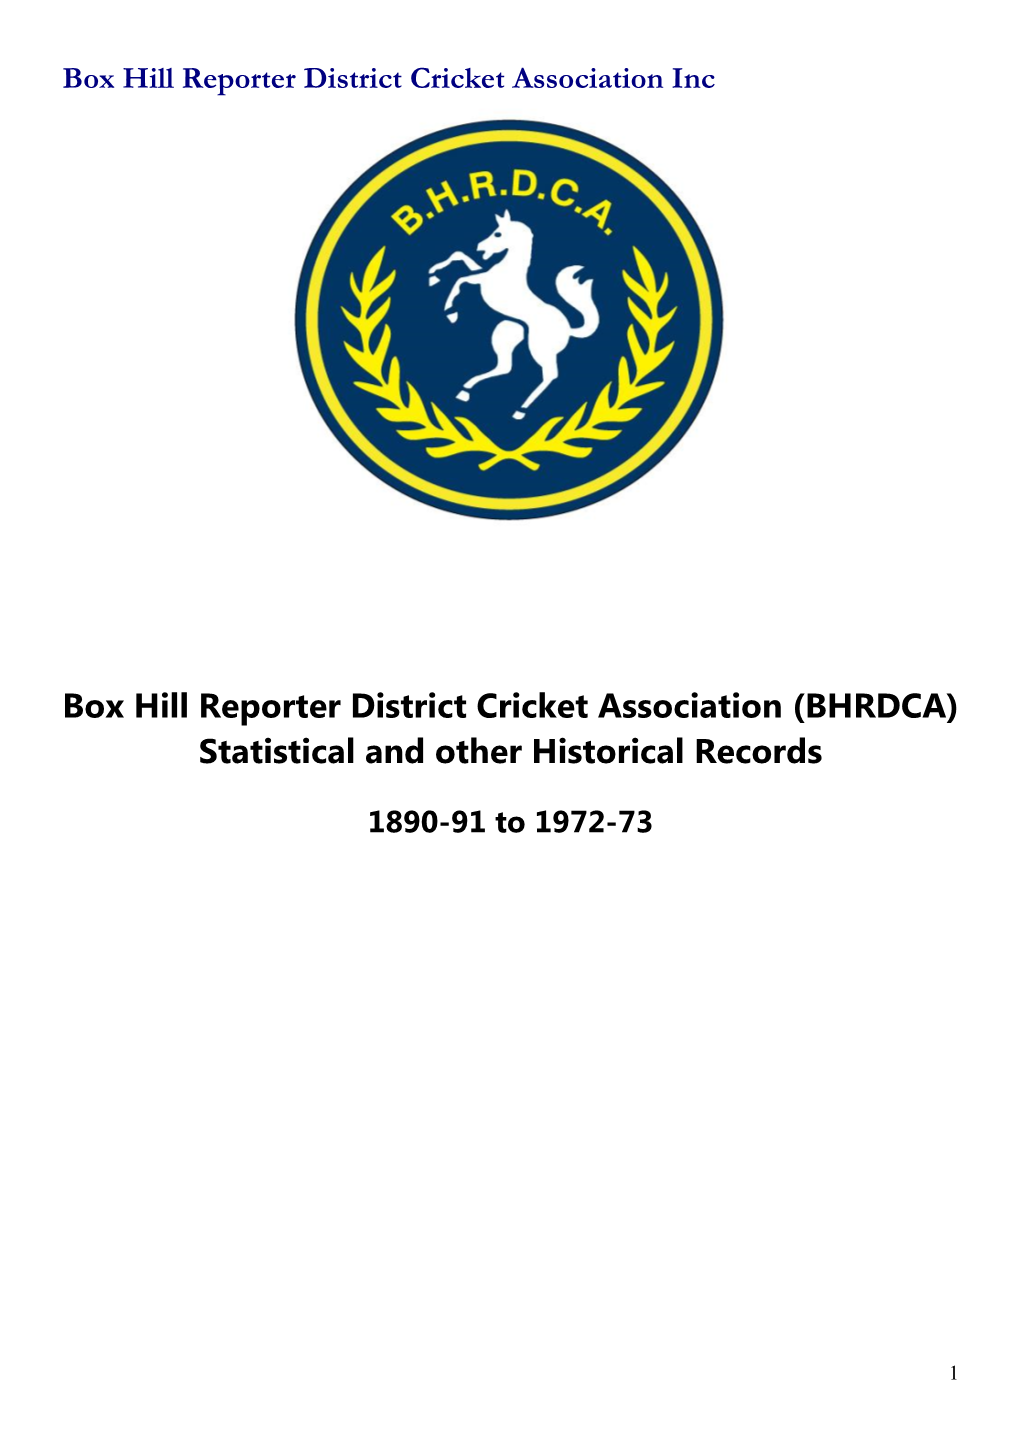 BHRDCA – Records (1890-91 to 1972-73)